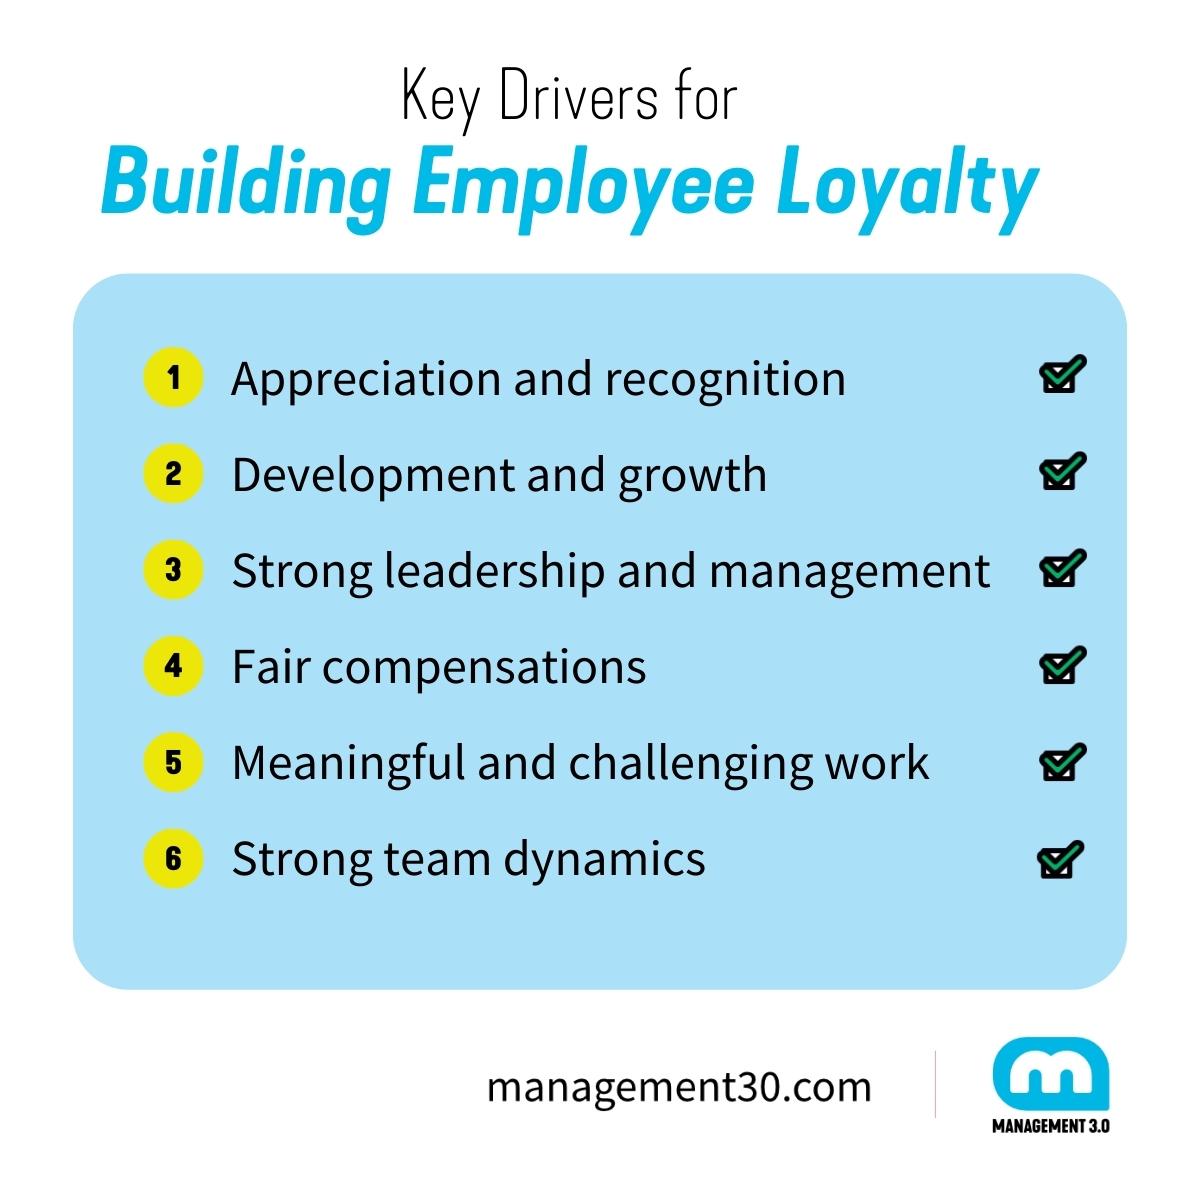 Key Drivers for Building Employee Loyalty